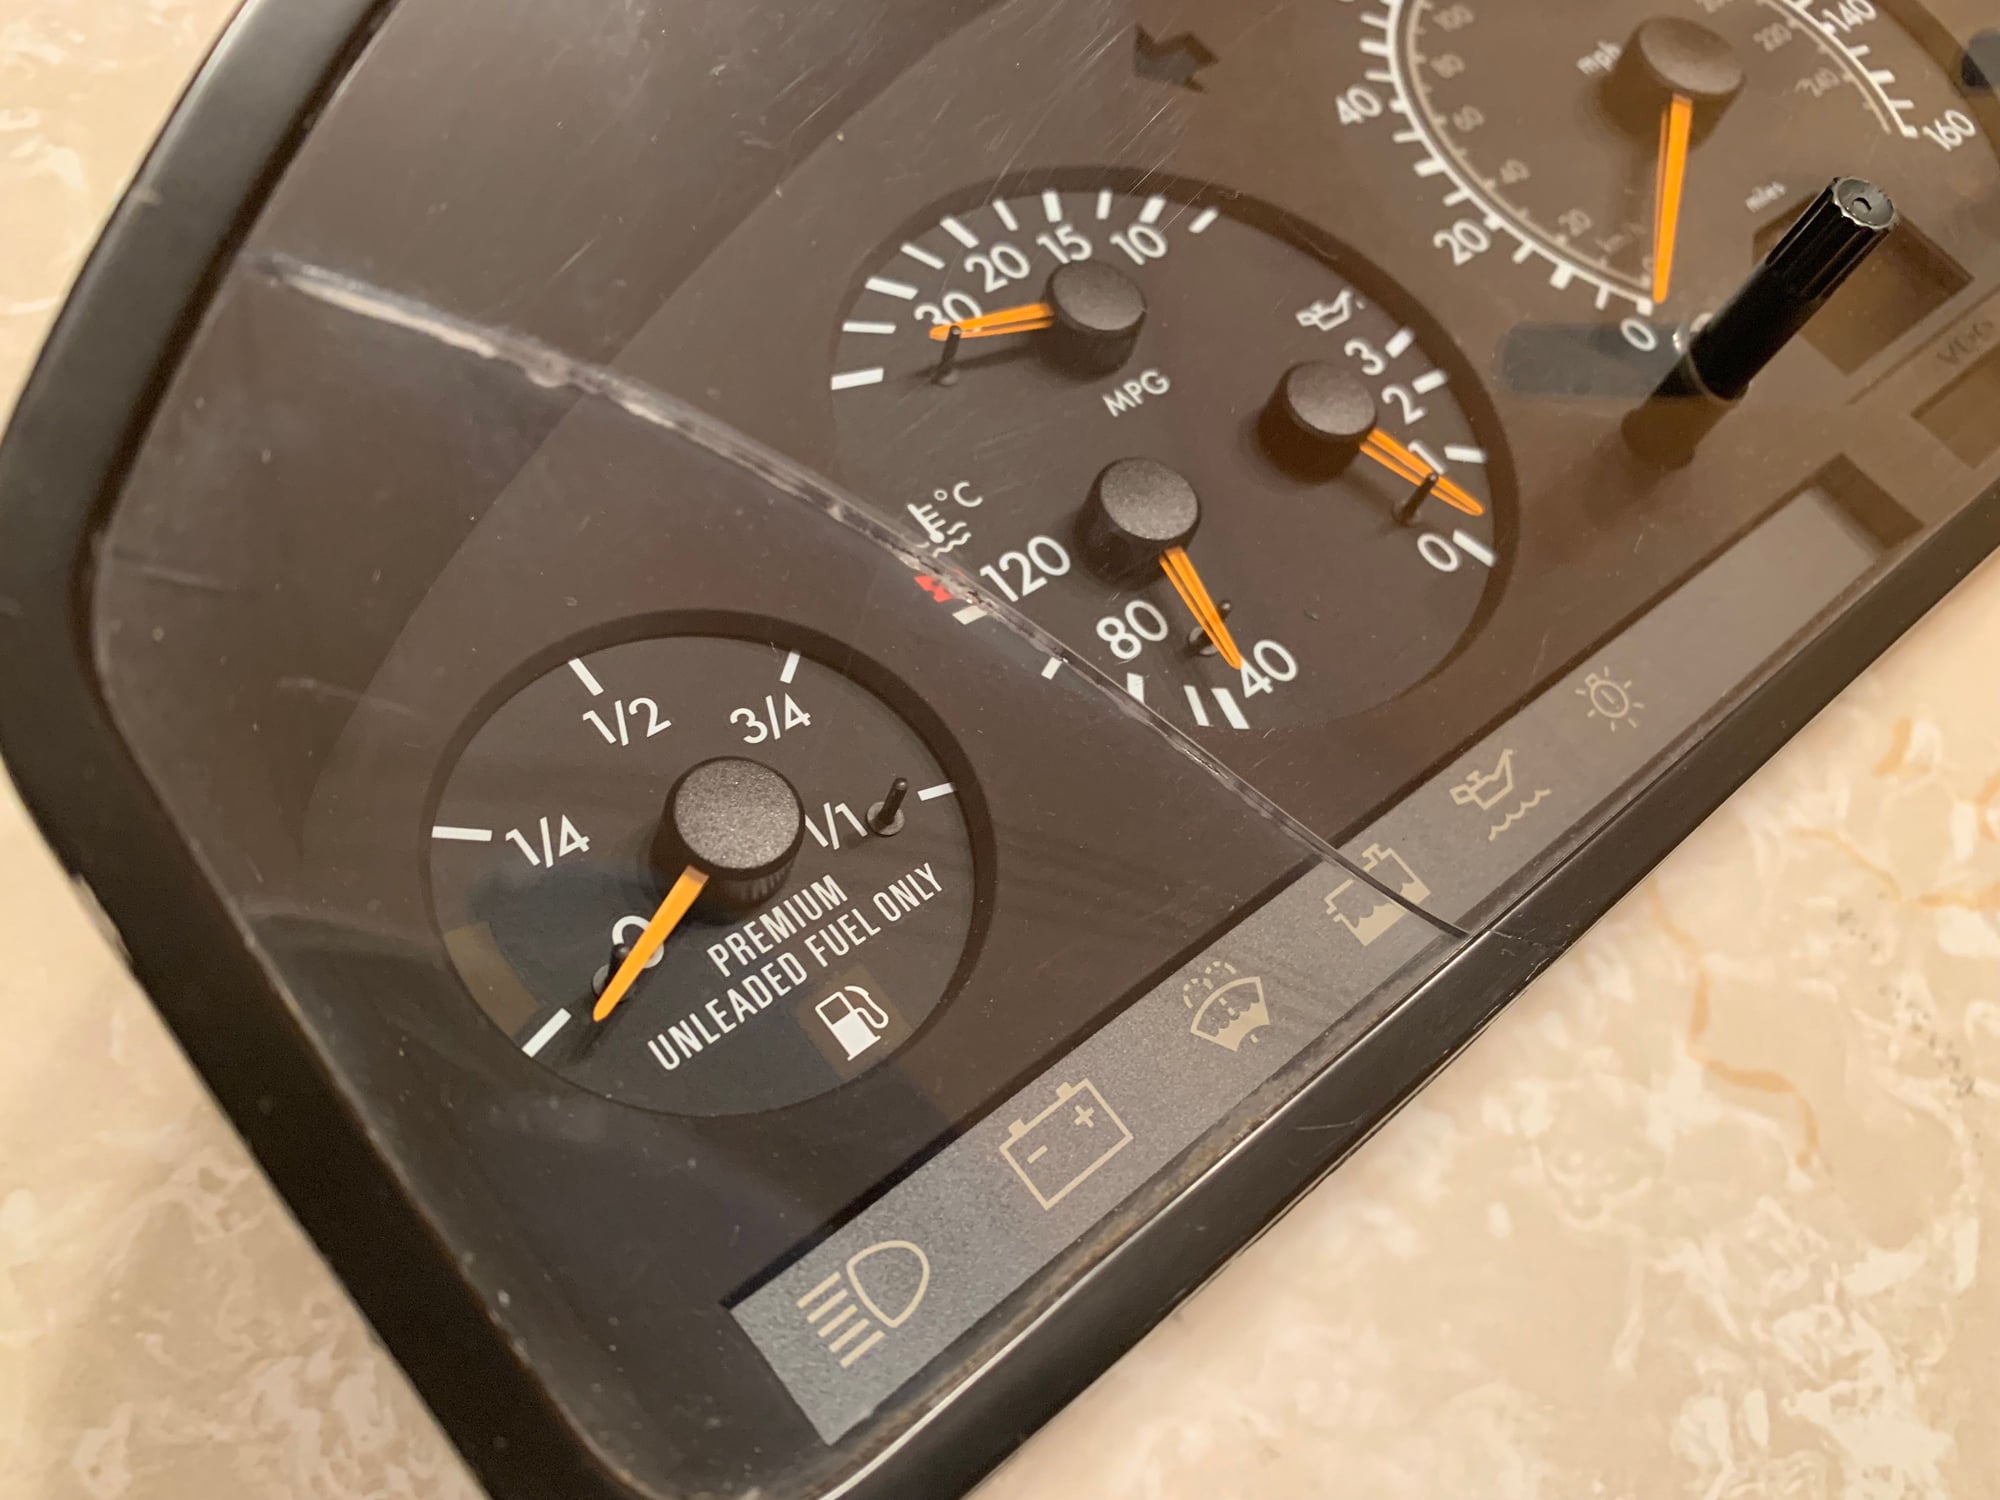 Interior/Upholstery - 98-99 Mercedes Benz R129 CL500 SL500/600 S500 Instrument Speedometer 1404407711 - Used - 1998 to 1999 Mercedes-Benz SL500 - 1998 to 1999 Mercedes-Benz S430 - 1998 to 1999 Mercedes-Benz CL500 - Chicago, IL 60457, United States